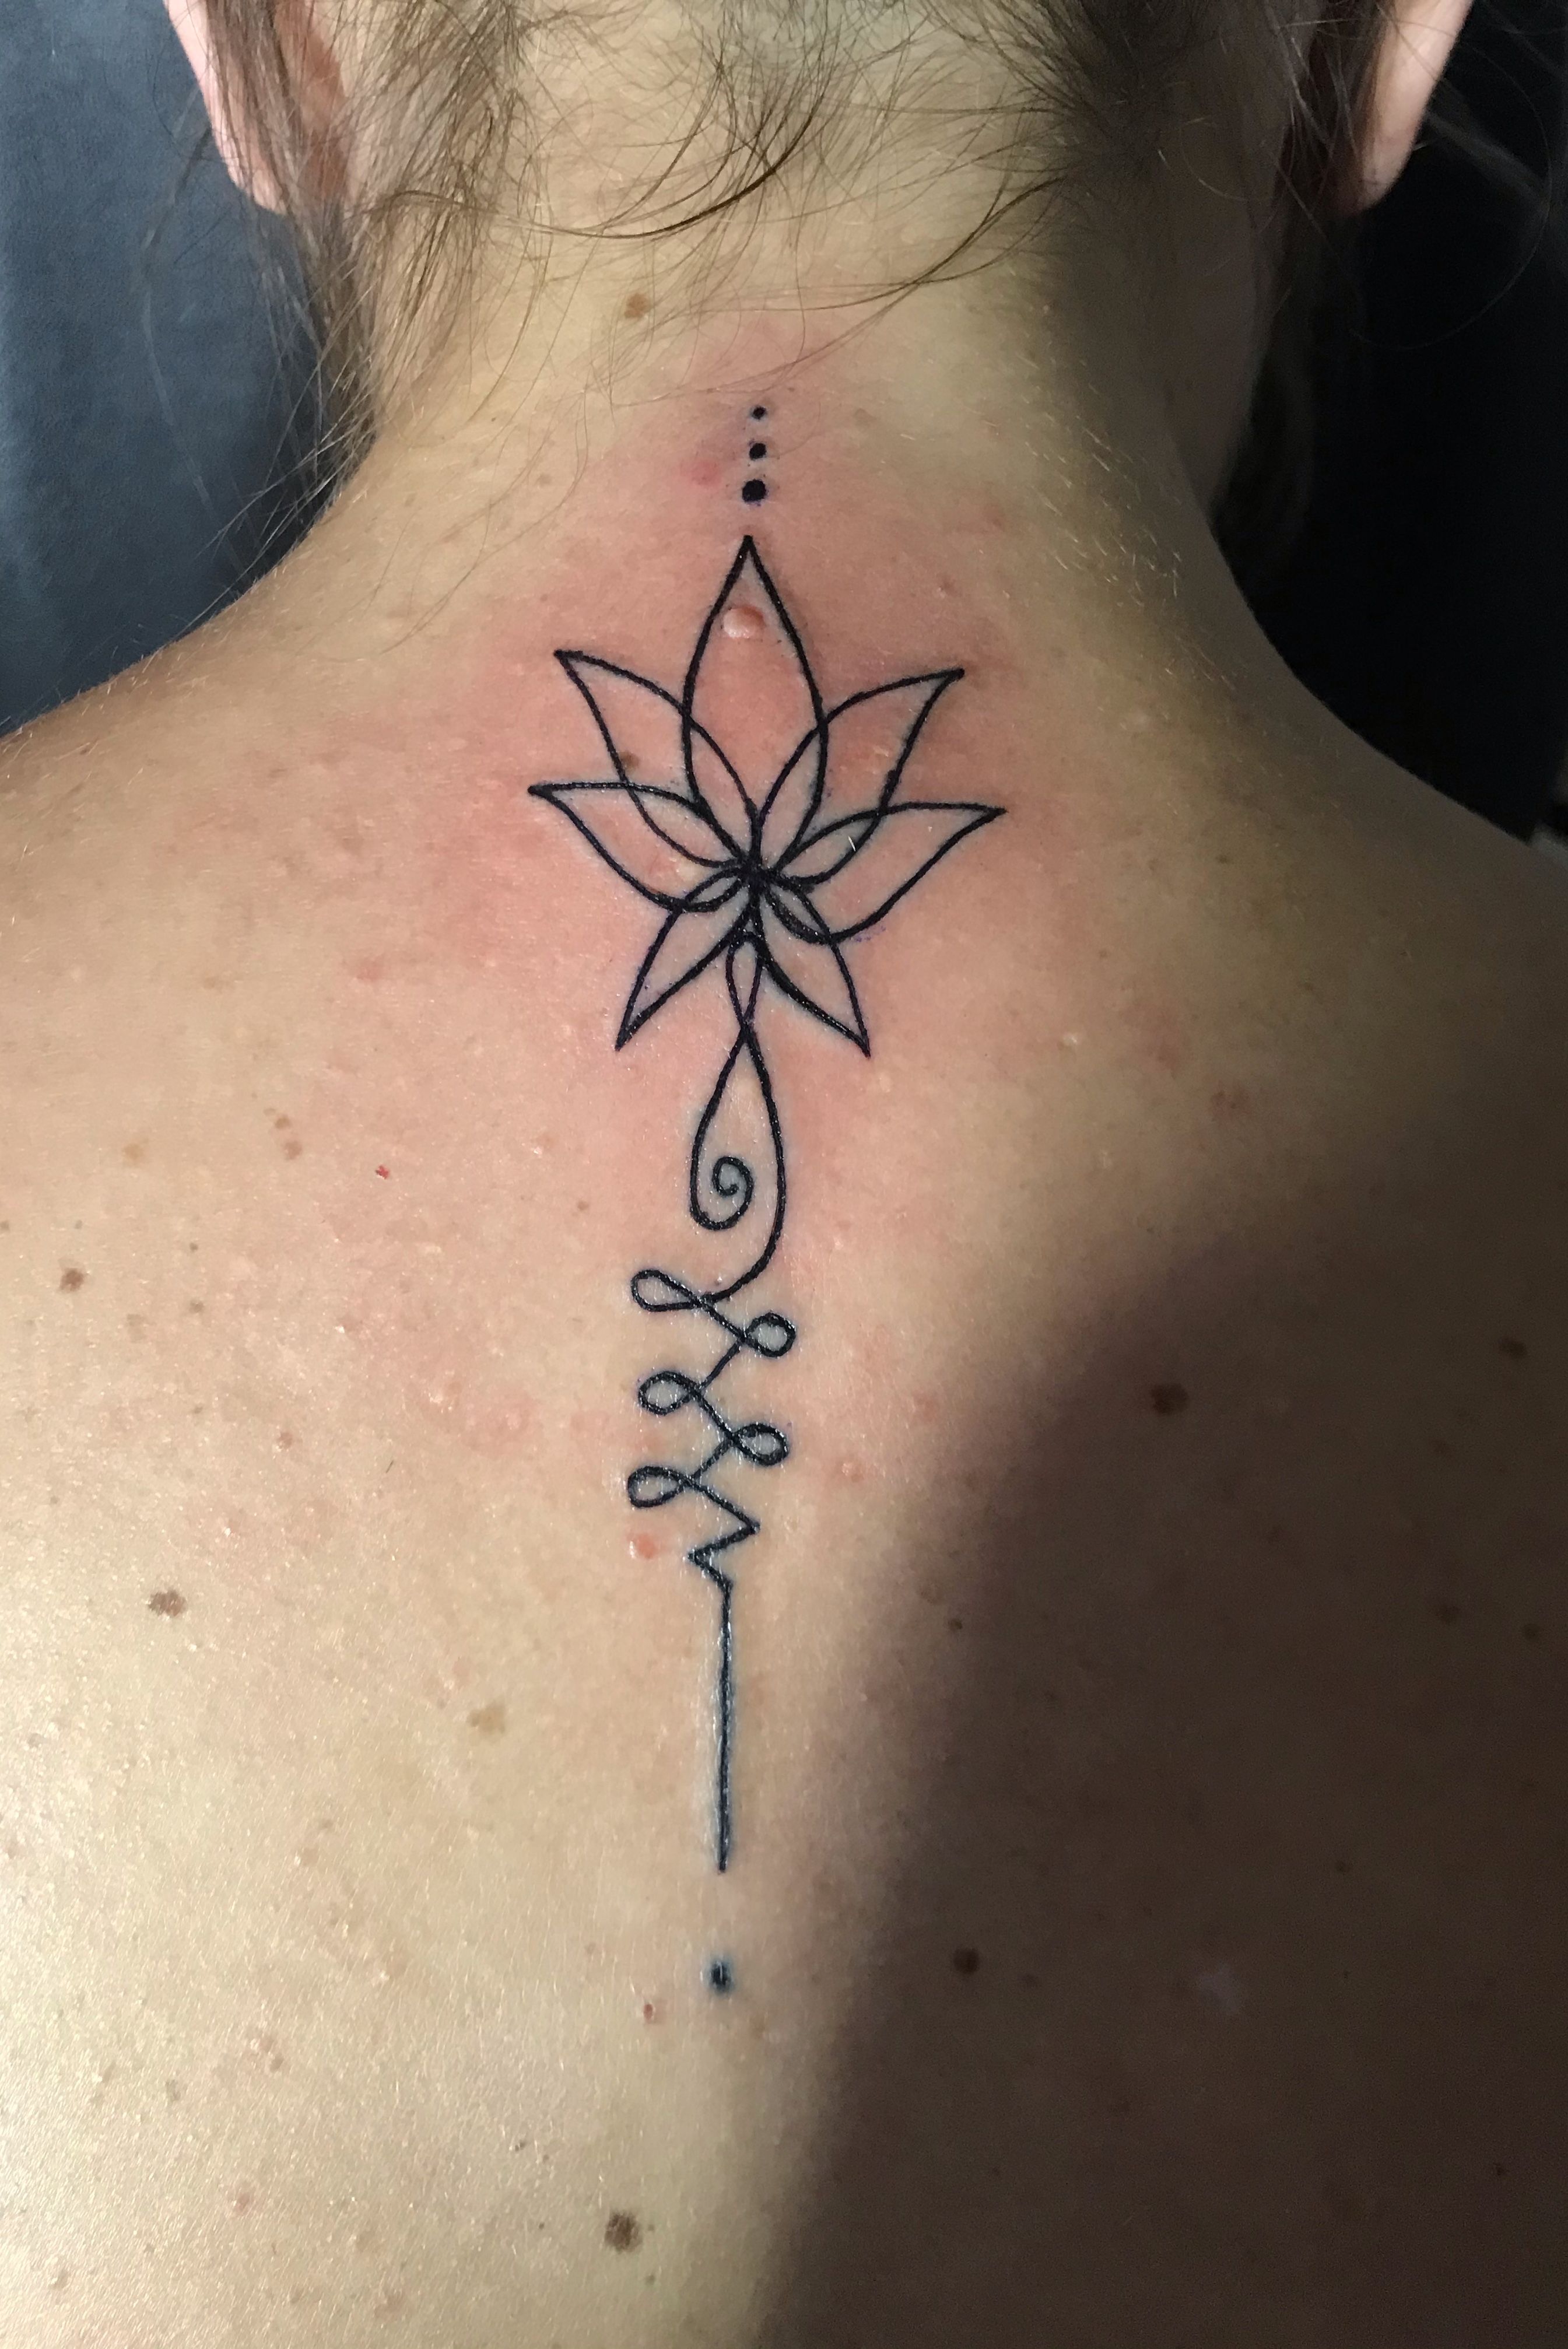 Background/ gap filler ideas for this back tattoo? : r/TattooDesigns